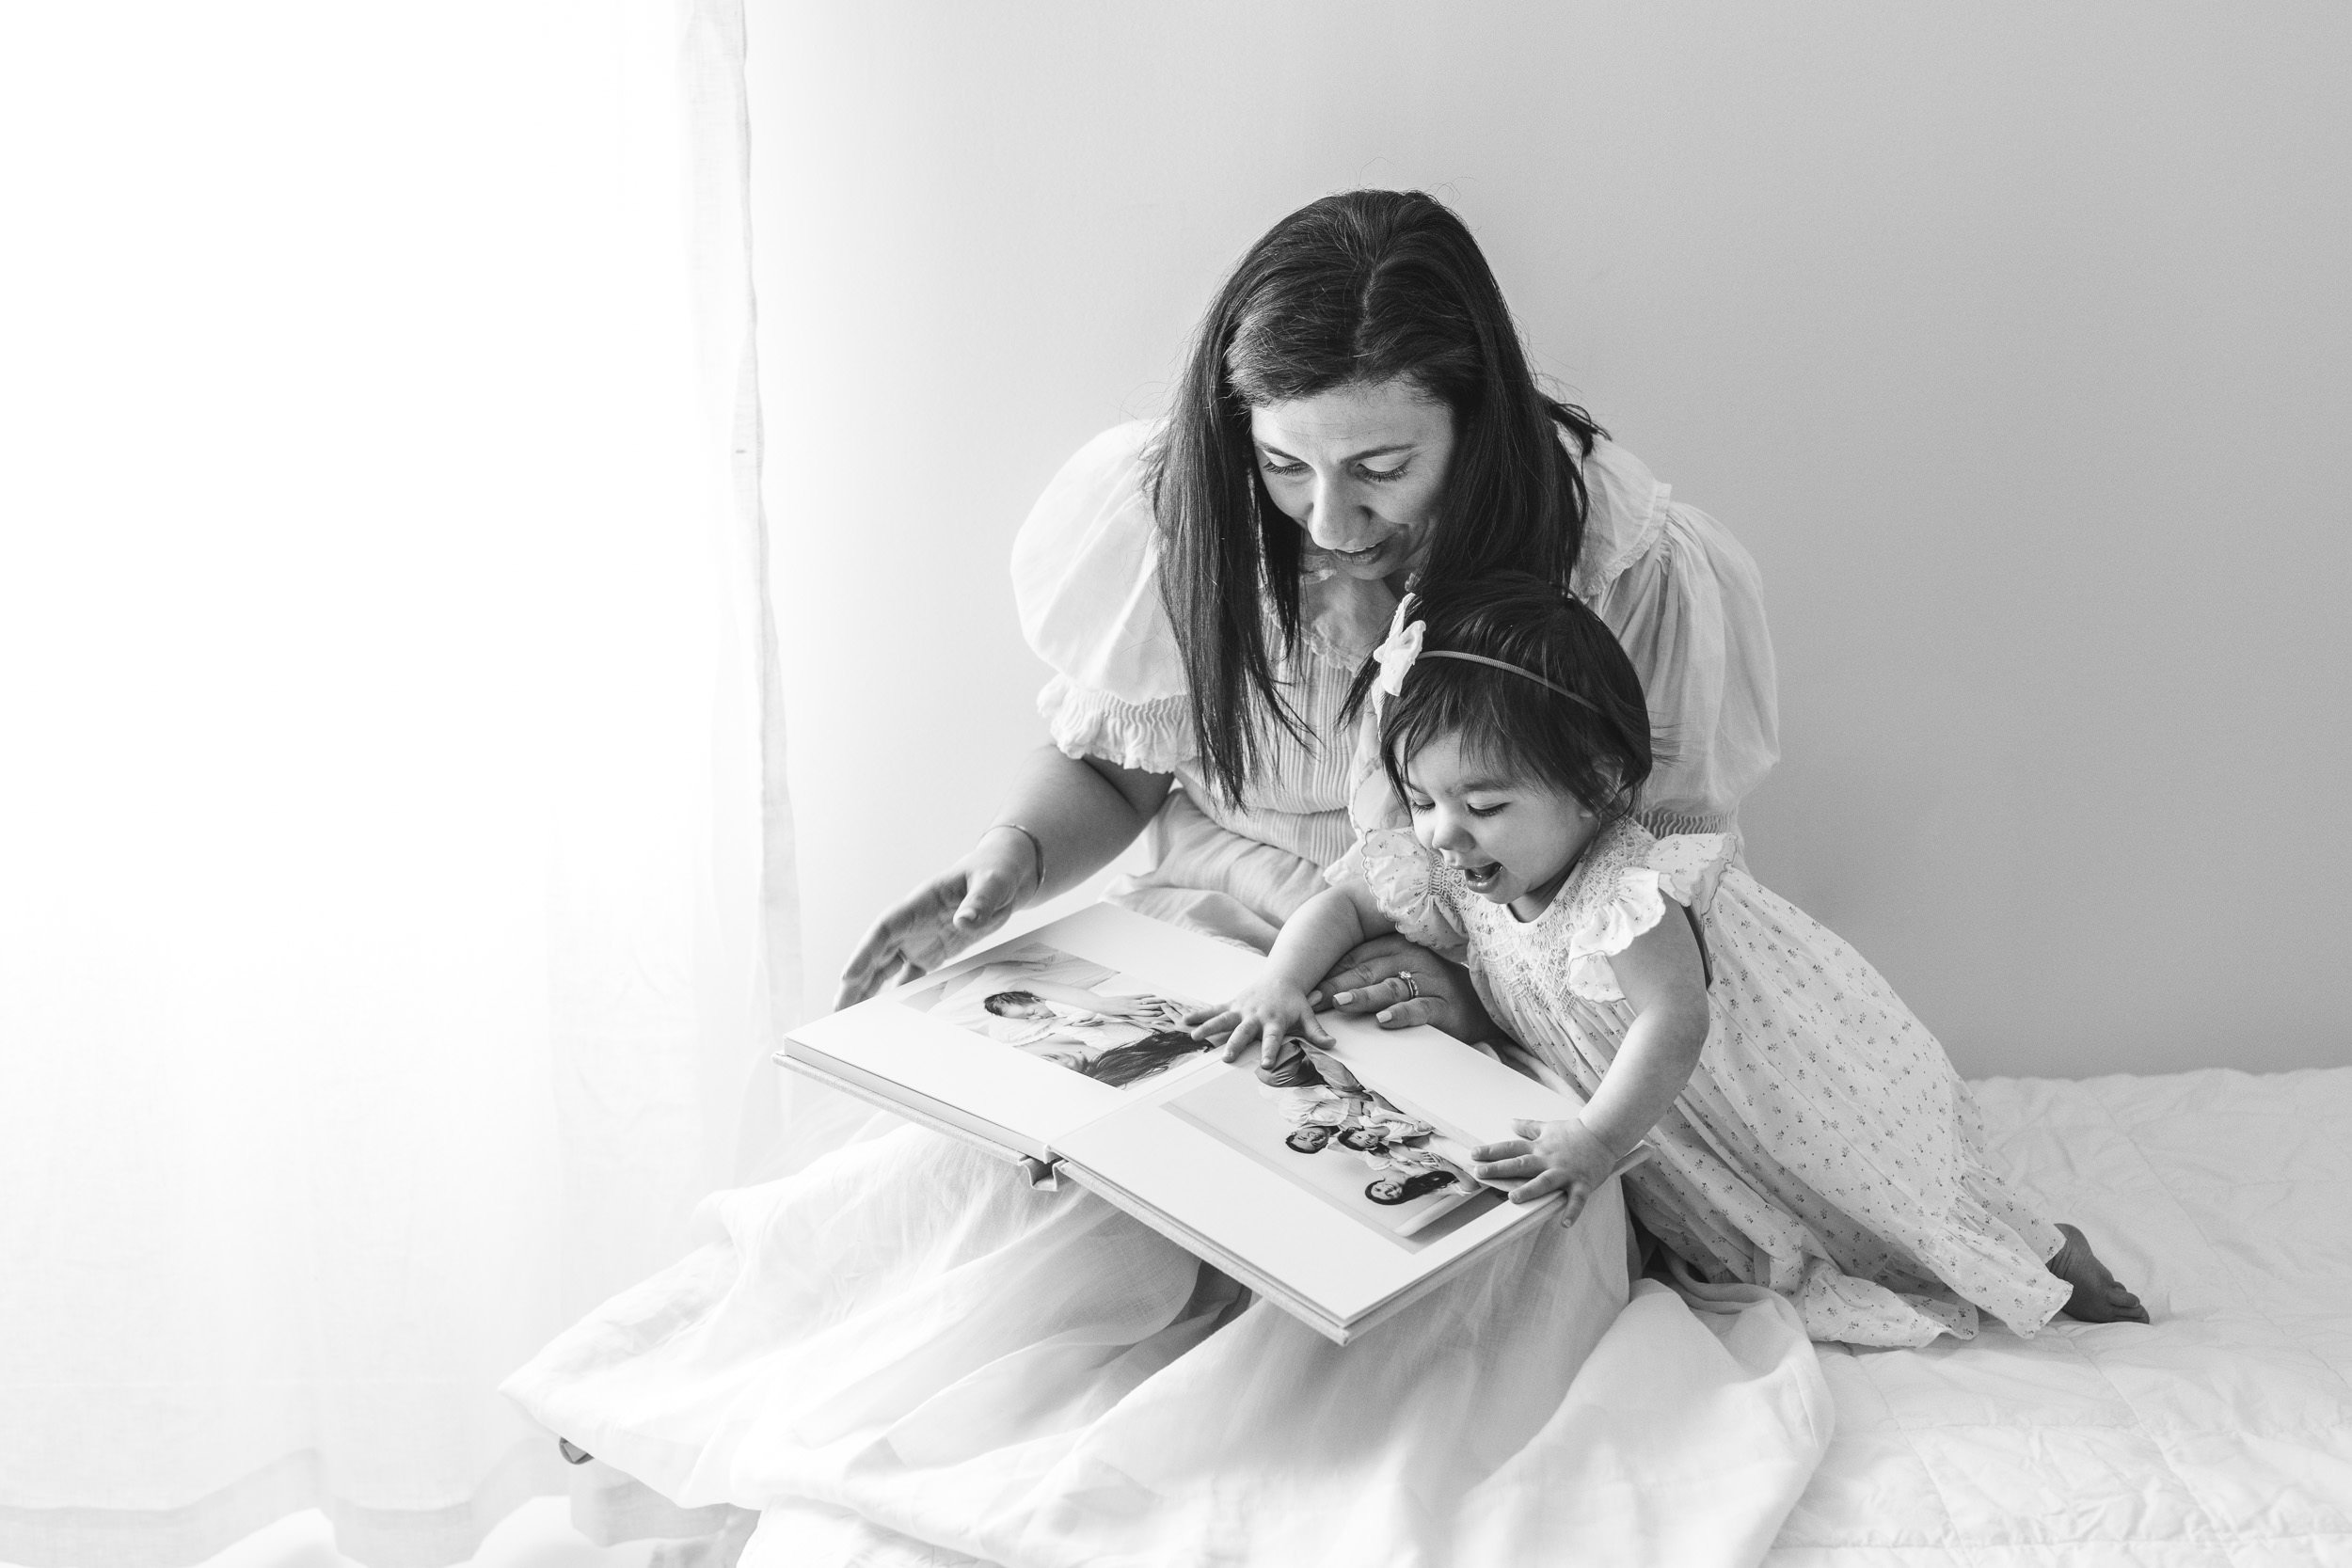  Black and white portrait of a mother and child looking at baby pictures by Nicole Hawkins Photography. mother and baby girl NJ photographers #nicolehawkinsphotography #nicolehawkinsbirthday #nicolehawkinsportraits #NJstudiophotography #1stbirthday 